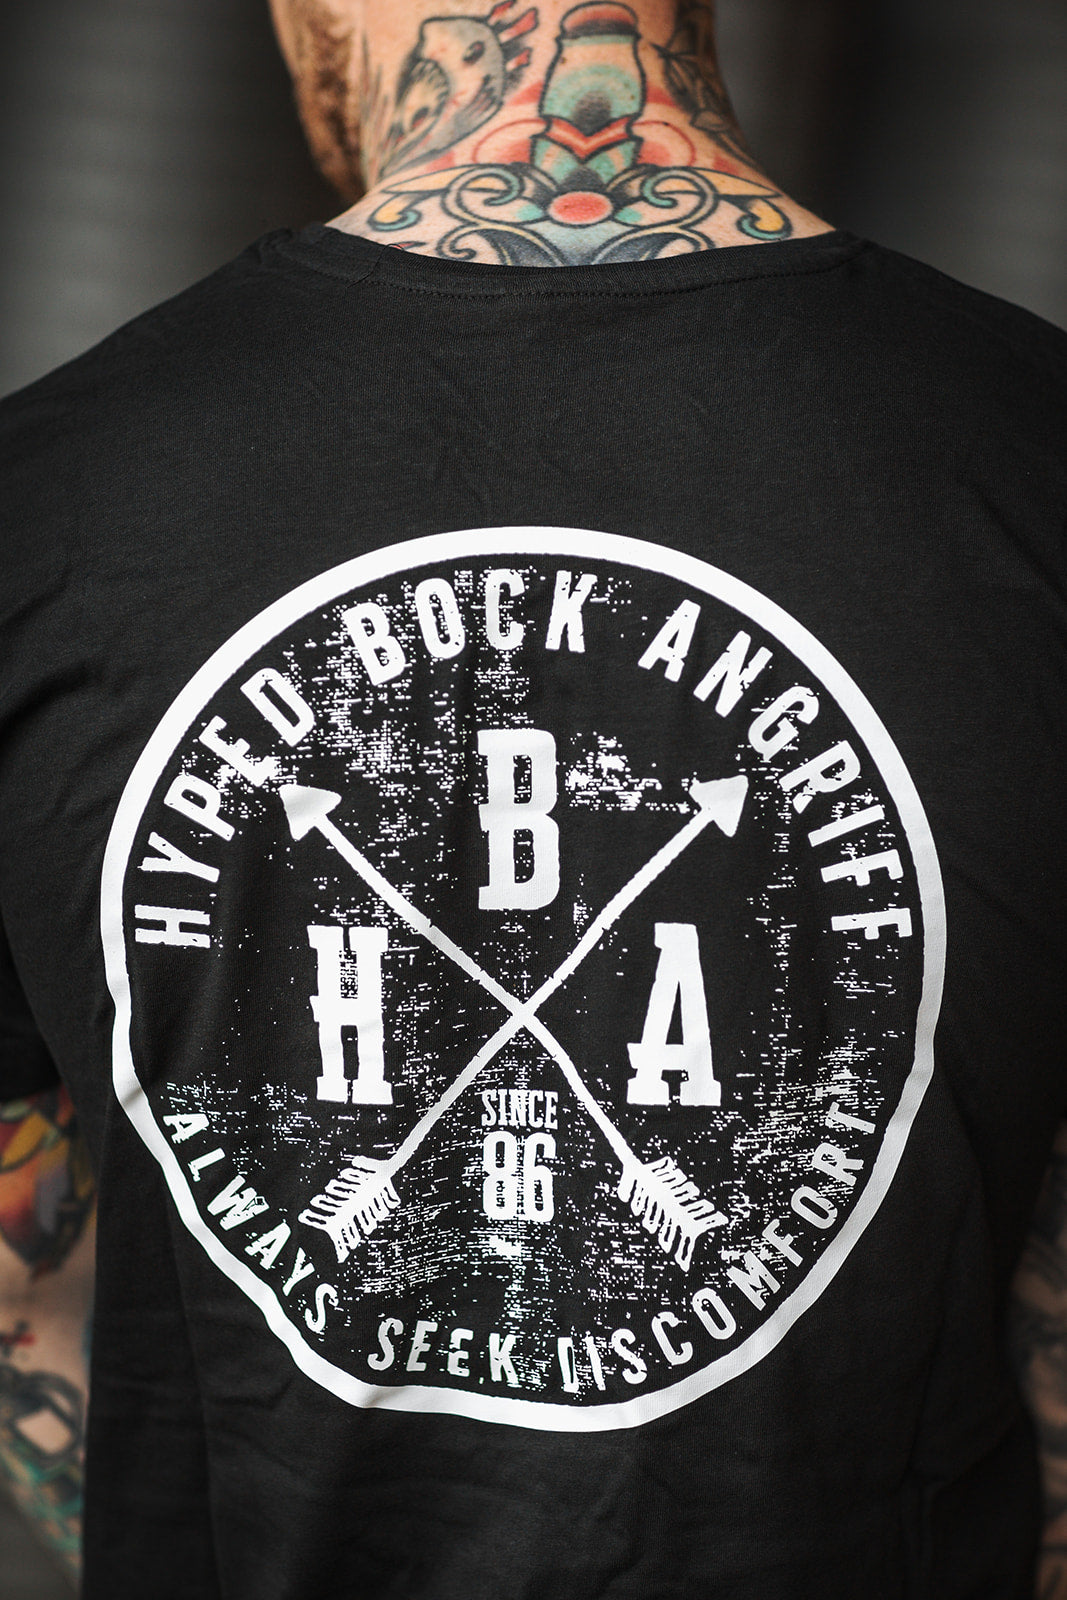 T-SHIRT LONG TEE "HYPED BOCK ANGRIFF EST 1986"